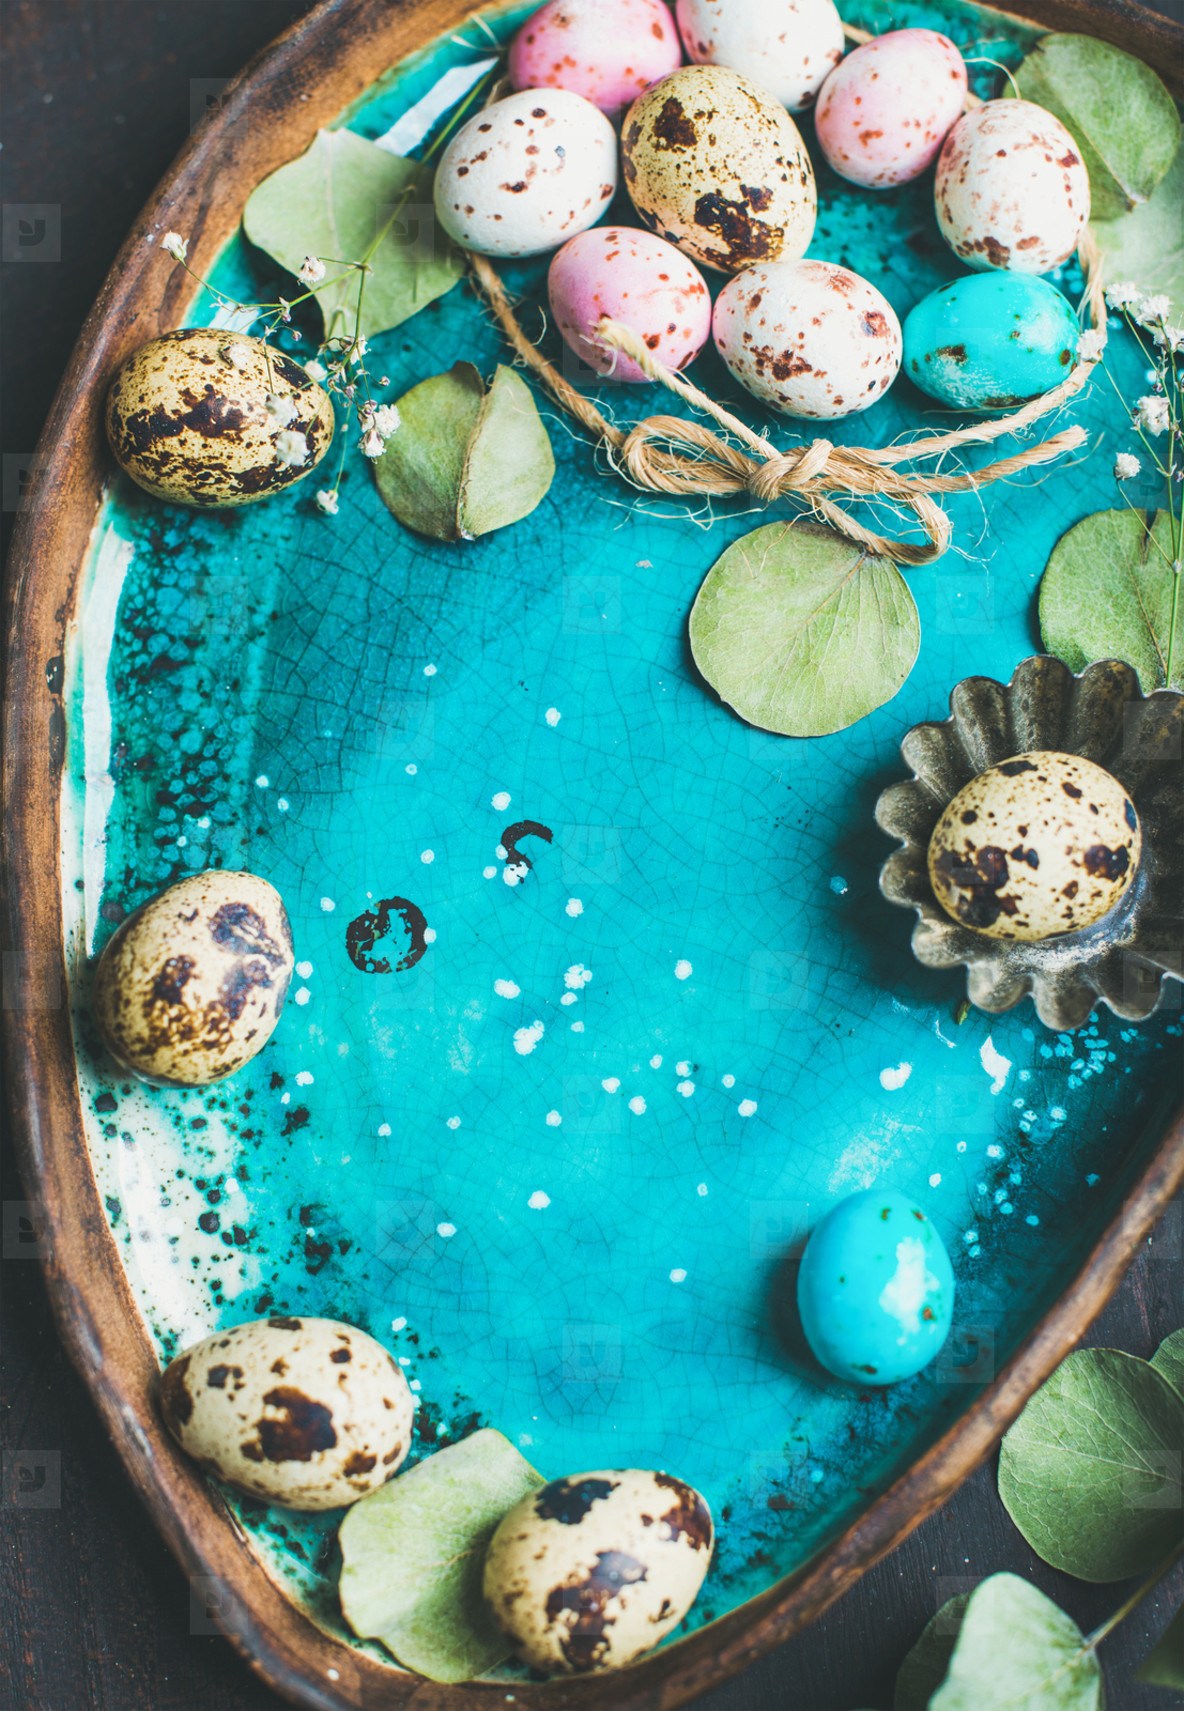 Colorful quail eggs  flowers  leaves for Easter over blue tray